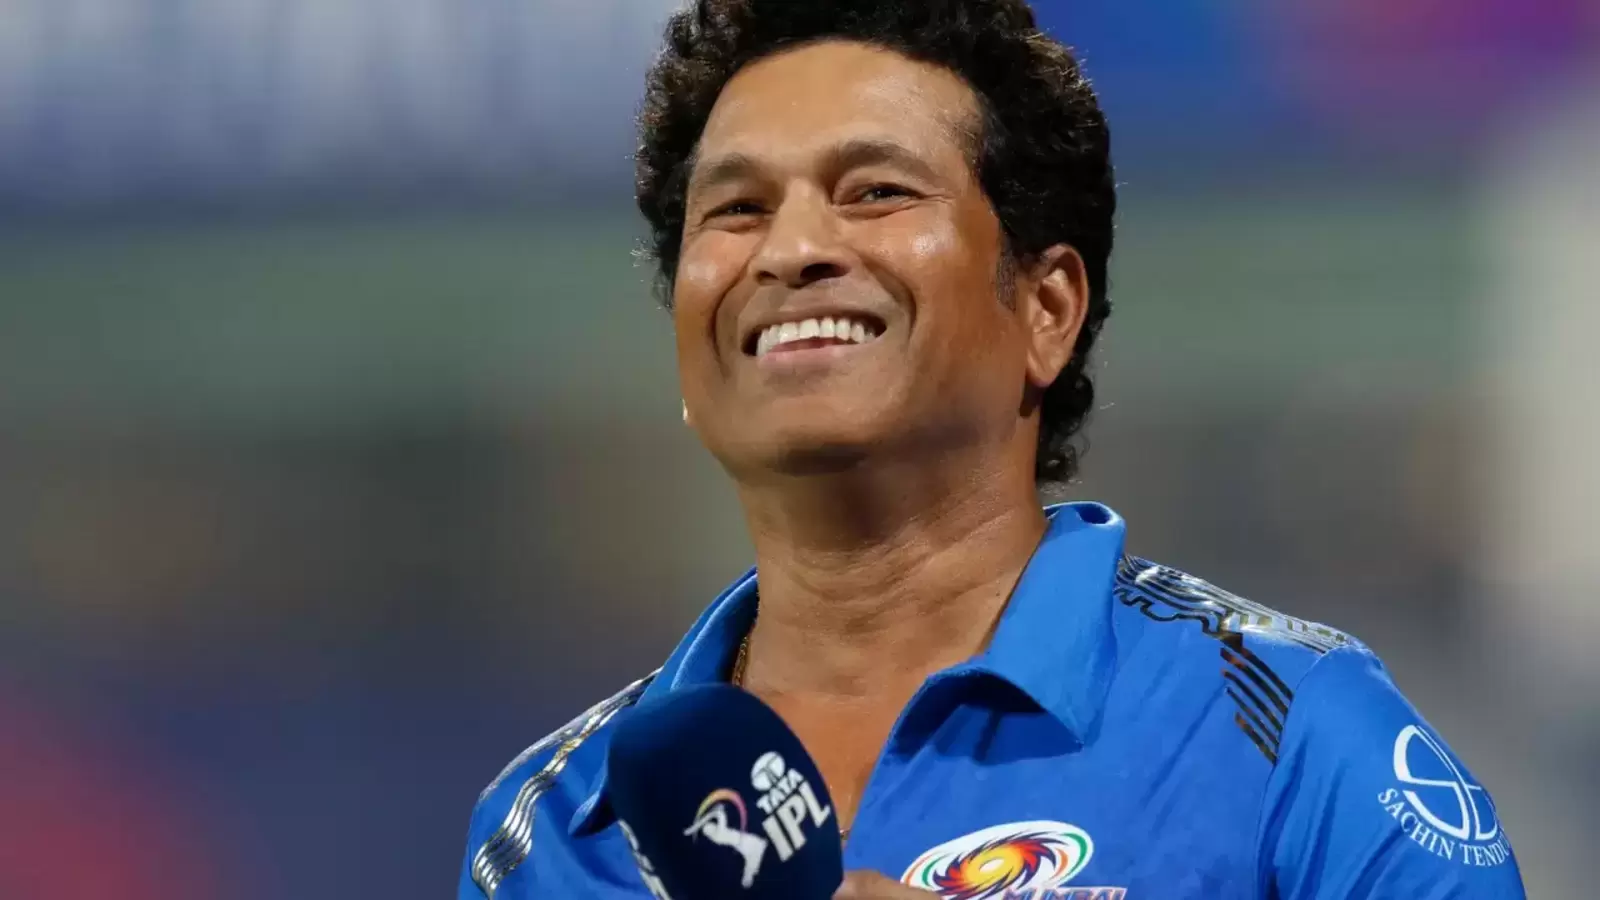 He's one of leading bowlers in India at the death': Tendulkar on ...